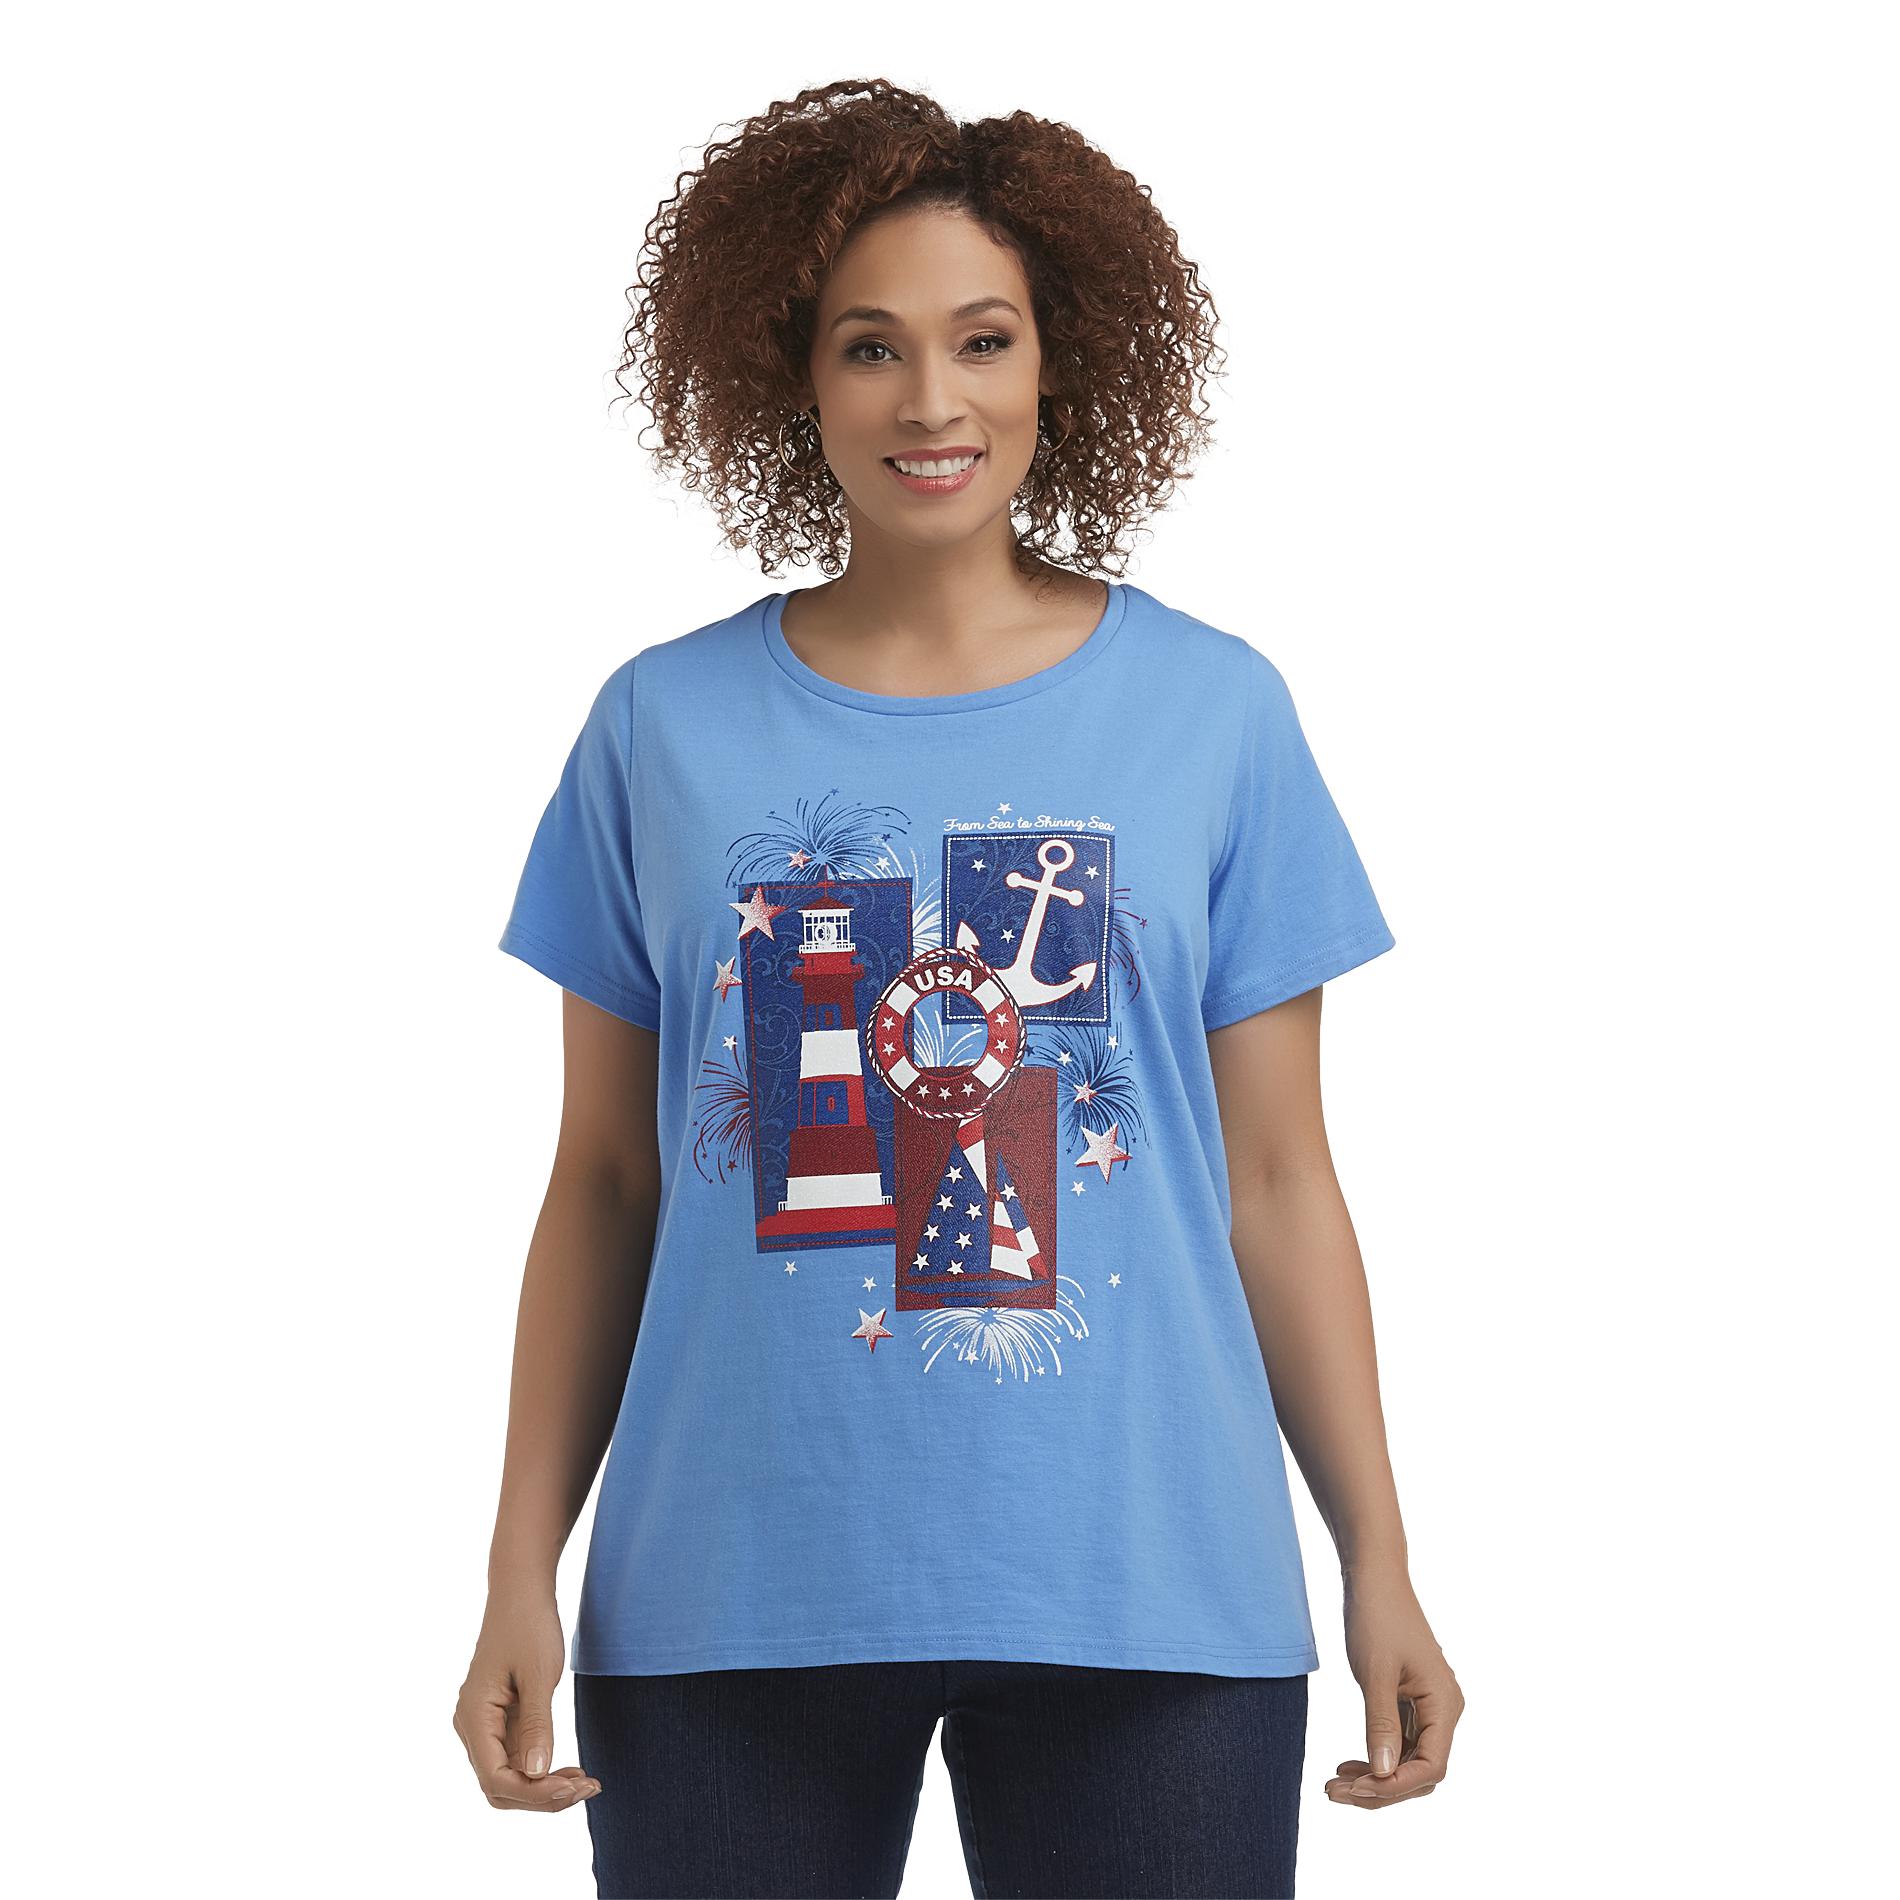 Holiday Editions Women's Plus Graphic T-Shirt - Sea To Shining Sea